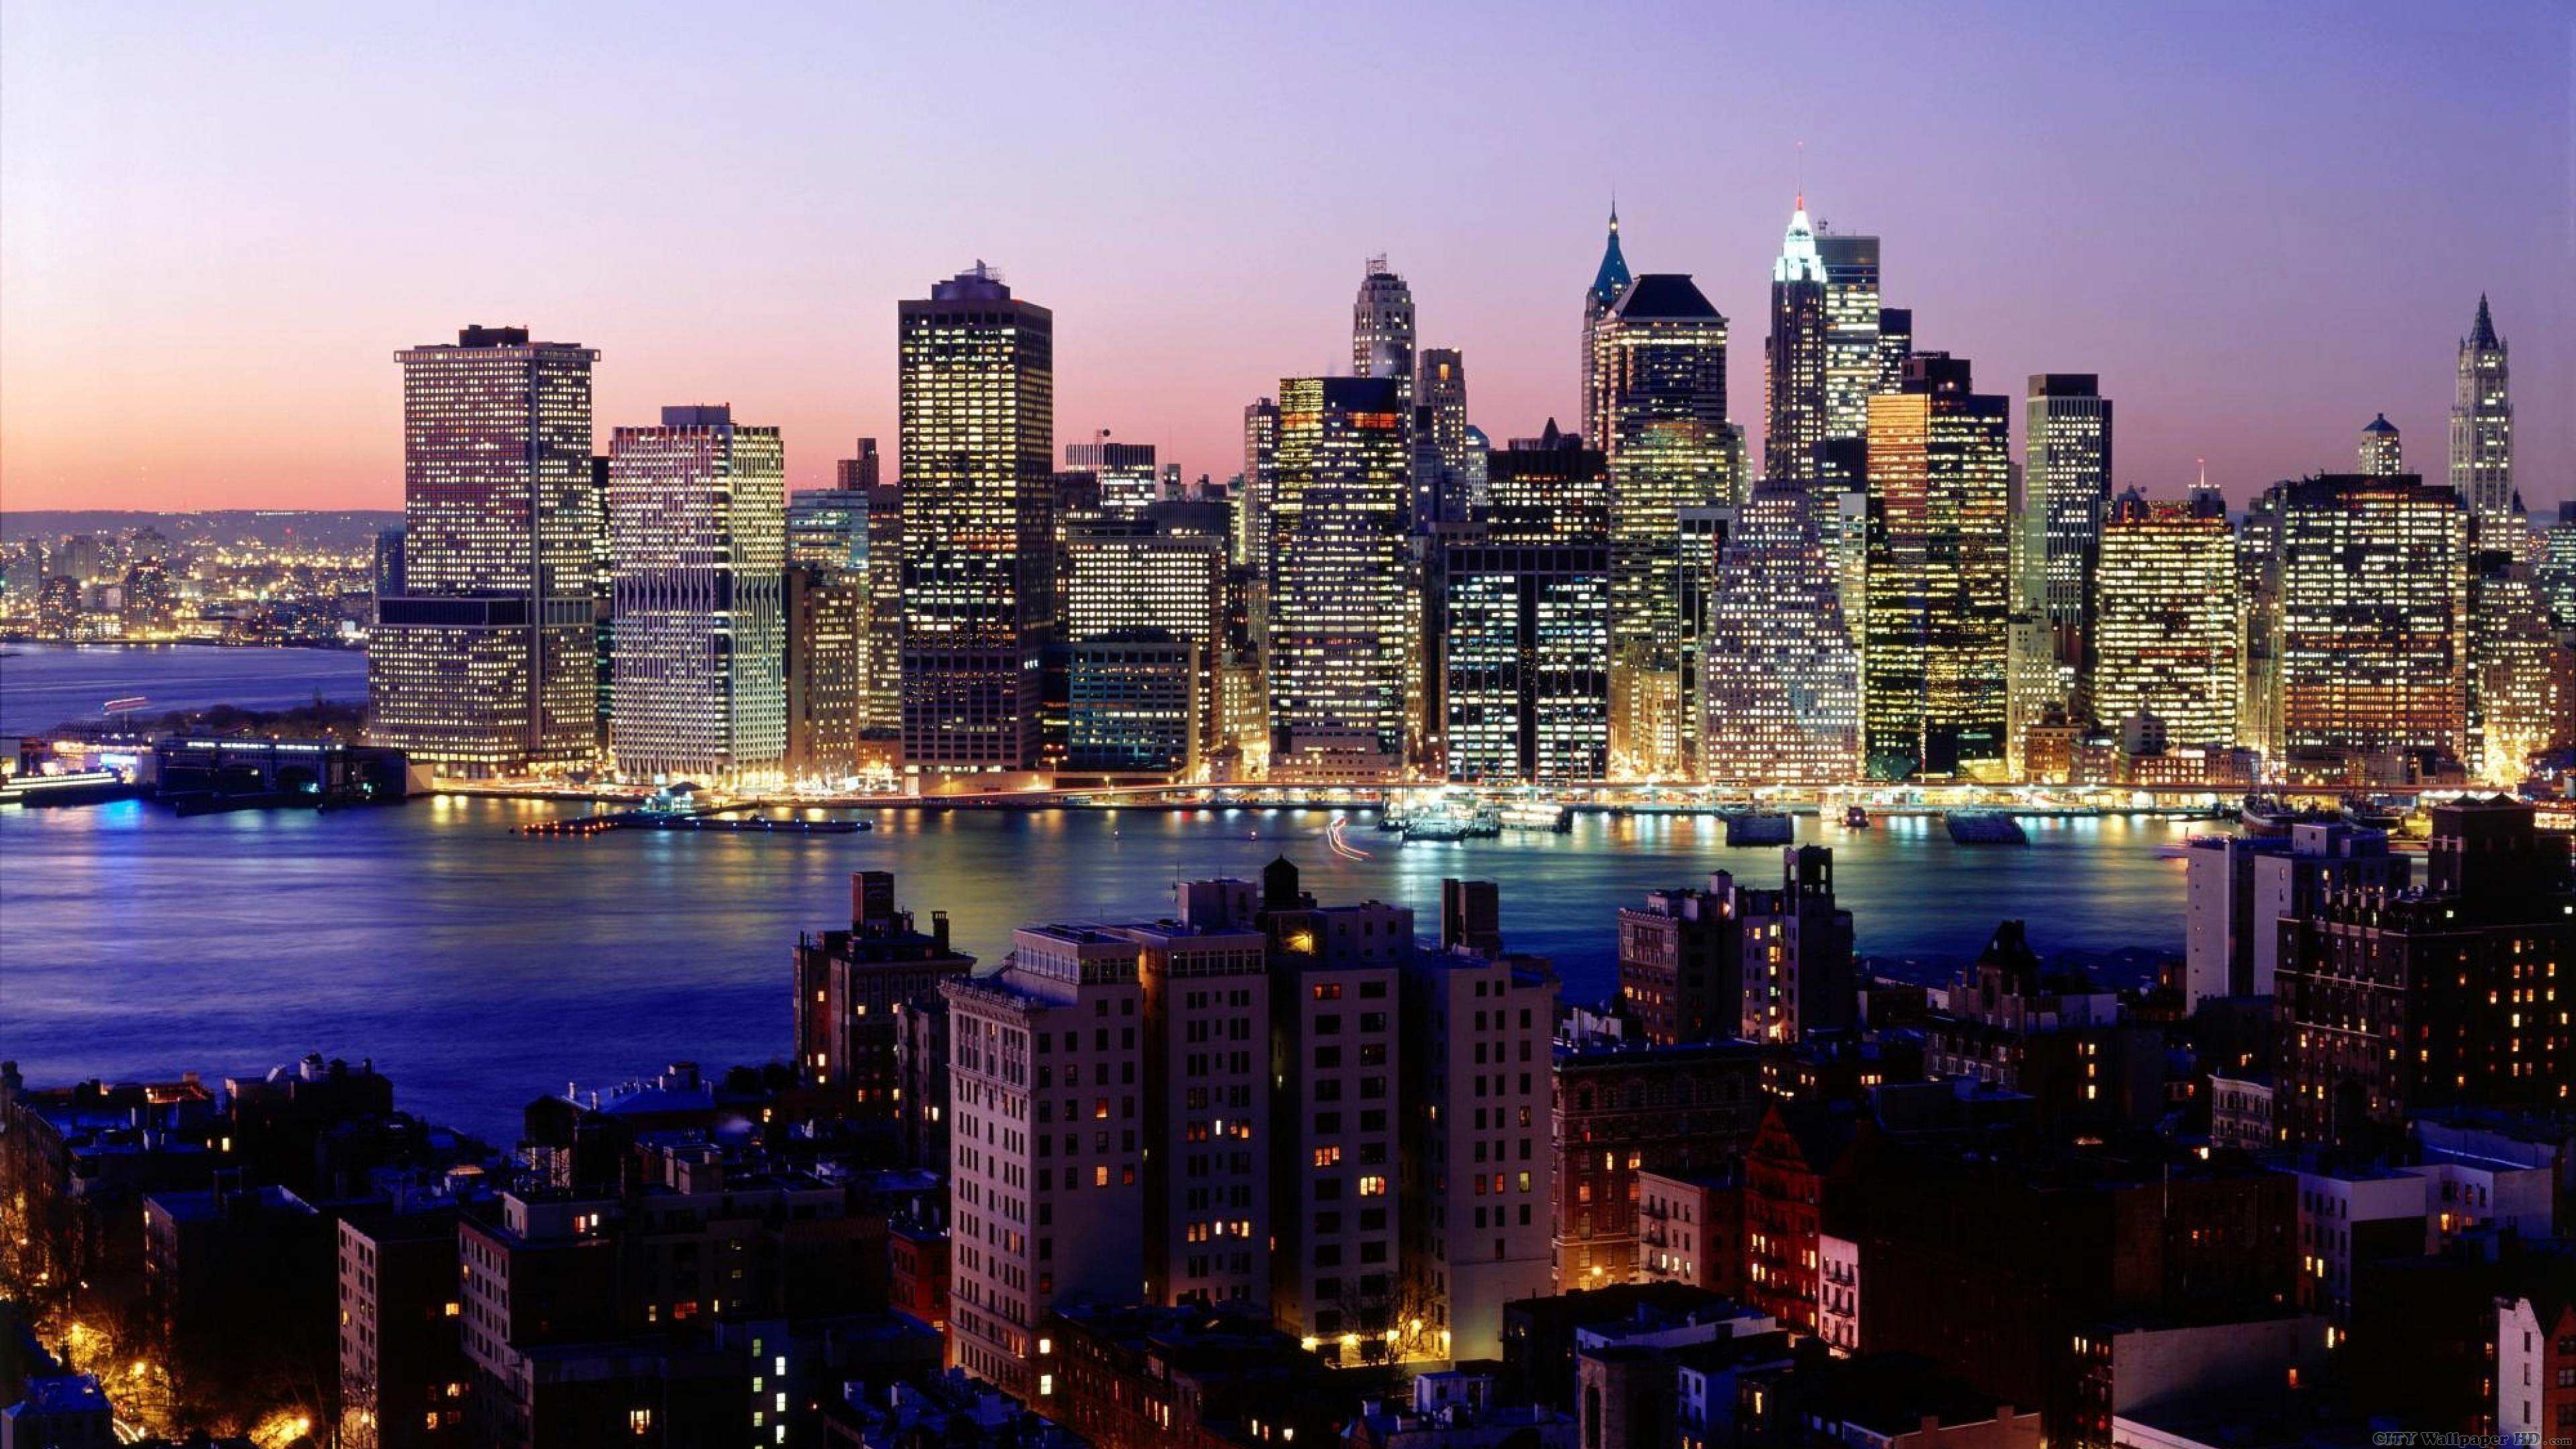 Night Lights Of New York Broad Backgrounds Of Cities And Countries For The Tablet New York Usa America